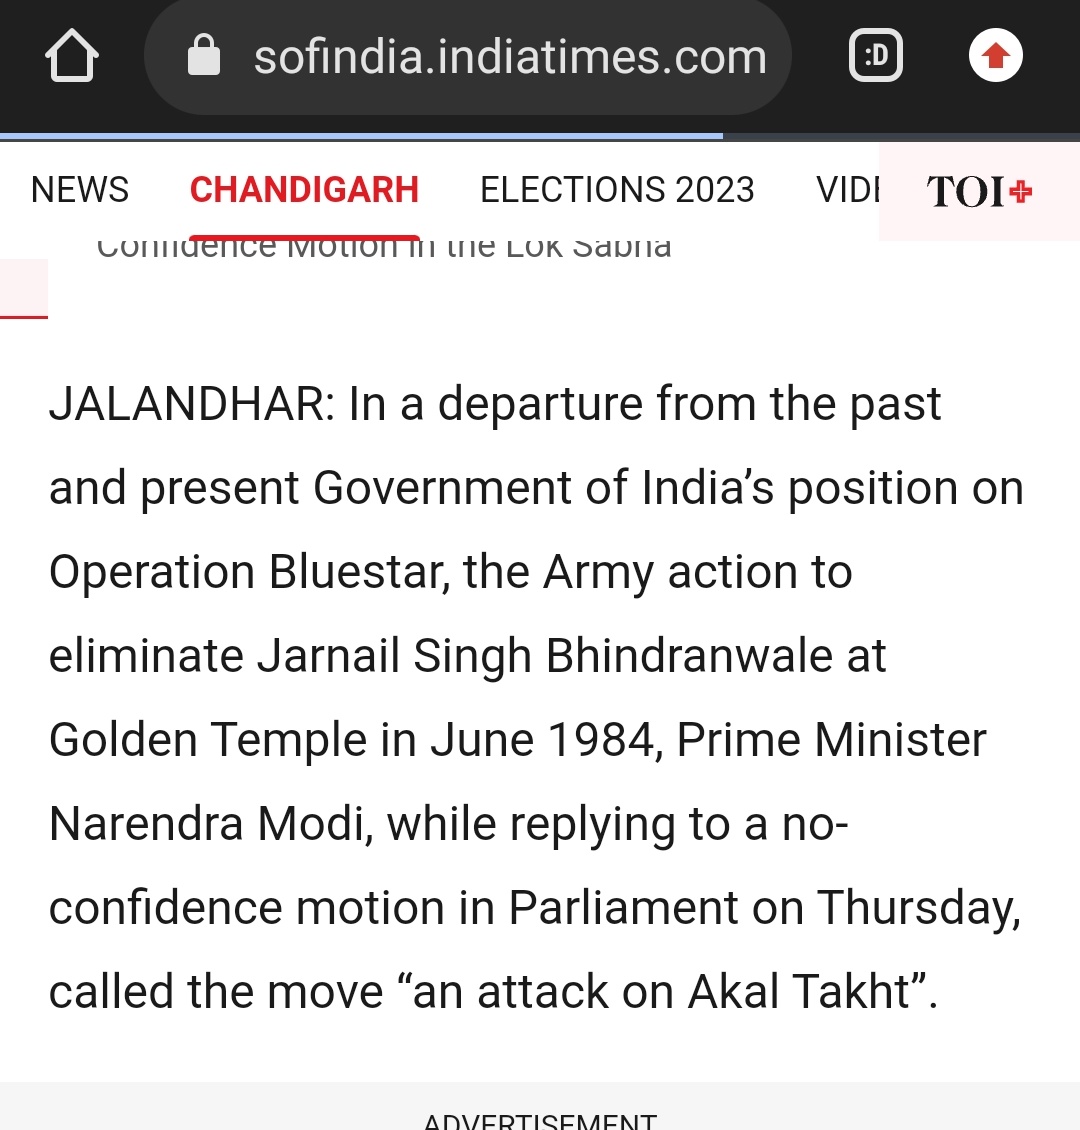 @ArvindMohapatr3 @Mr_Chhinra Modi BJP is ISI agent.

Modi BJP did Balakot joke to boost credibility of Pakistan and they opened Kartarpur Corridor despite warnings.

Modi condemned Operation Blue Star and Mizoram operation in Parliament.

Only ISI agents could do all this!